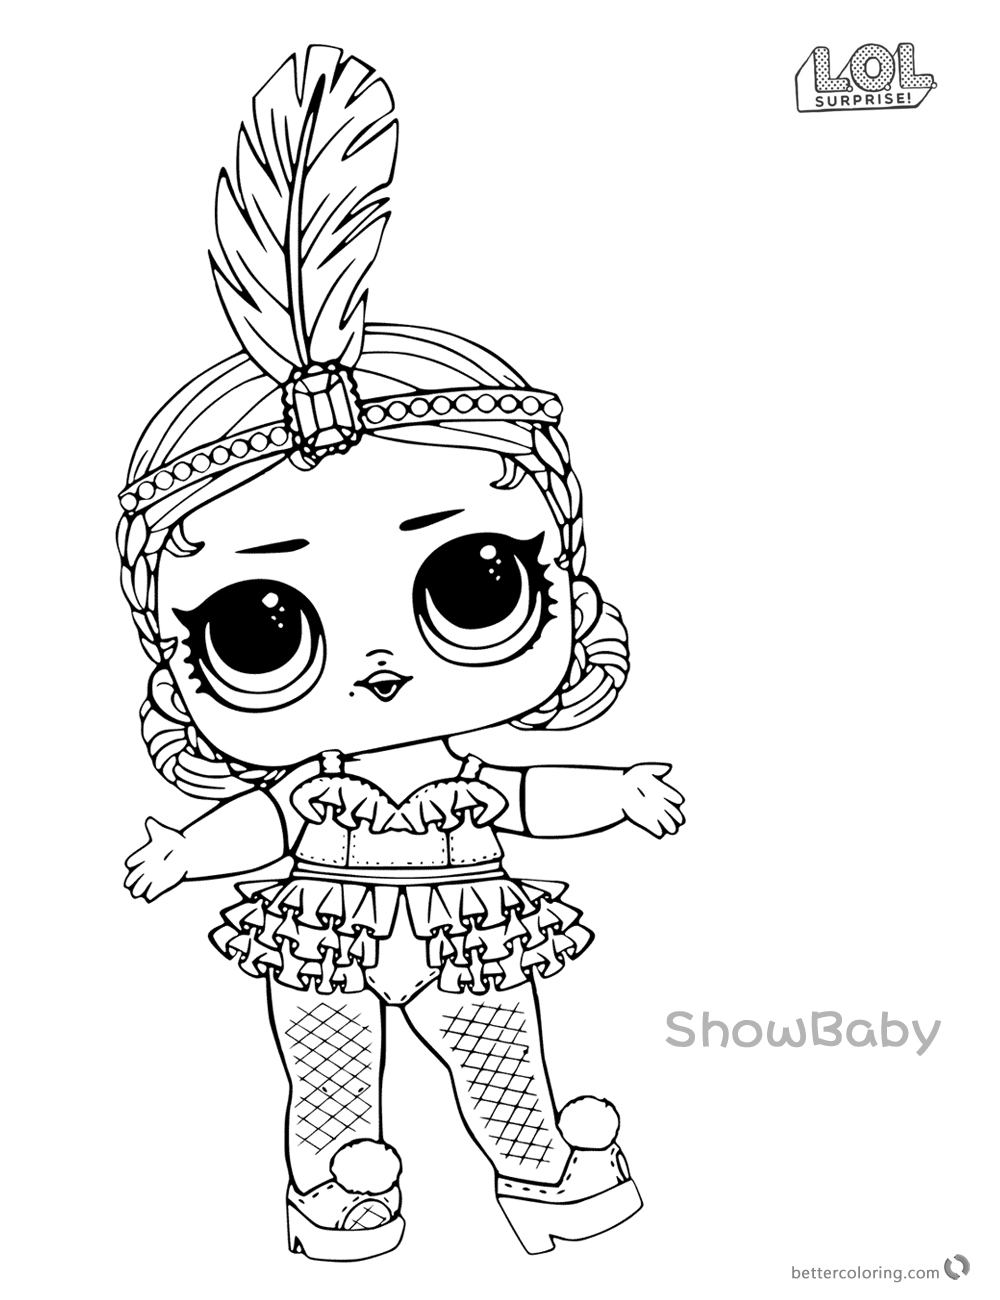 Coloring and Drawing: Coloring Pages Lol Surprise Dolls